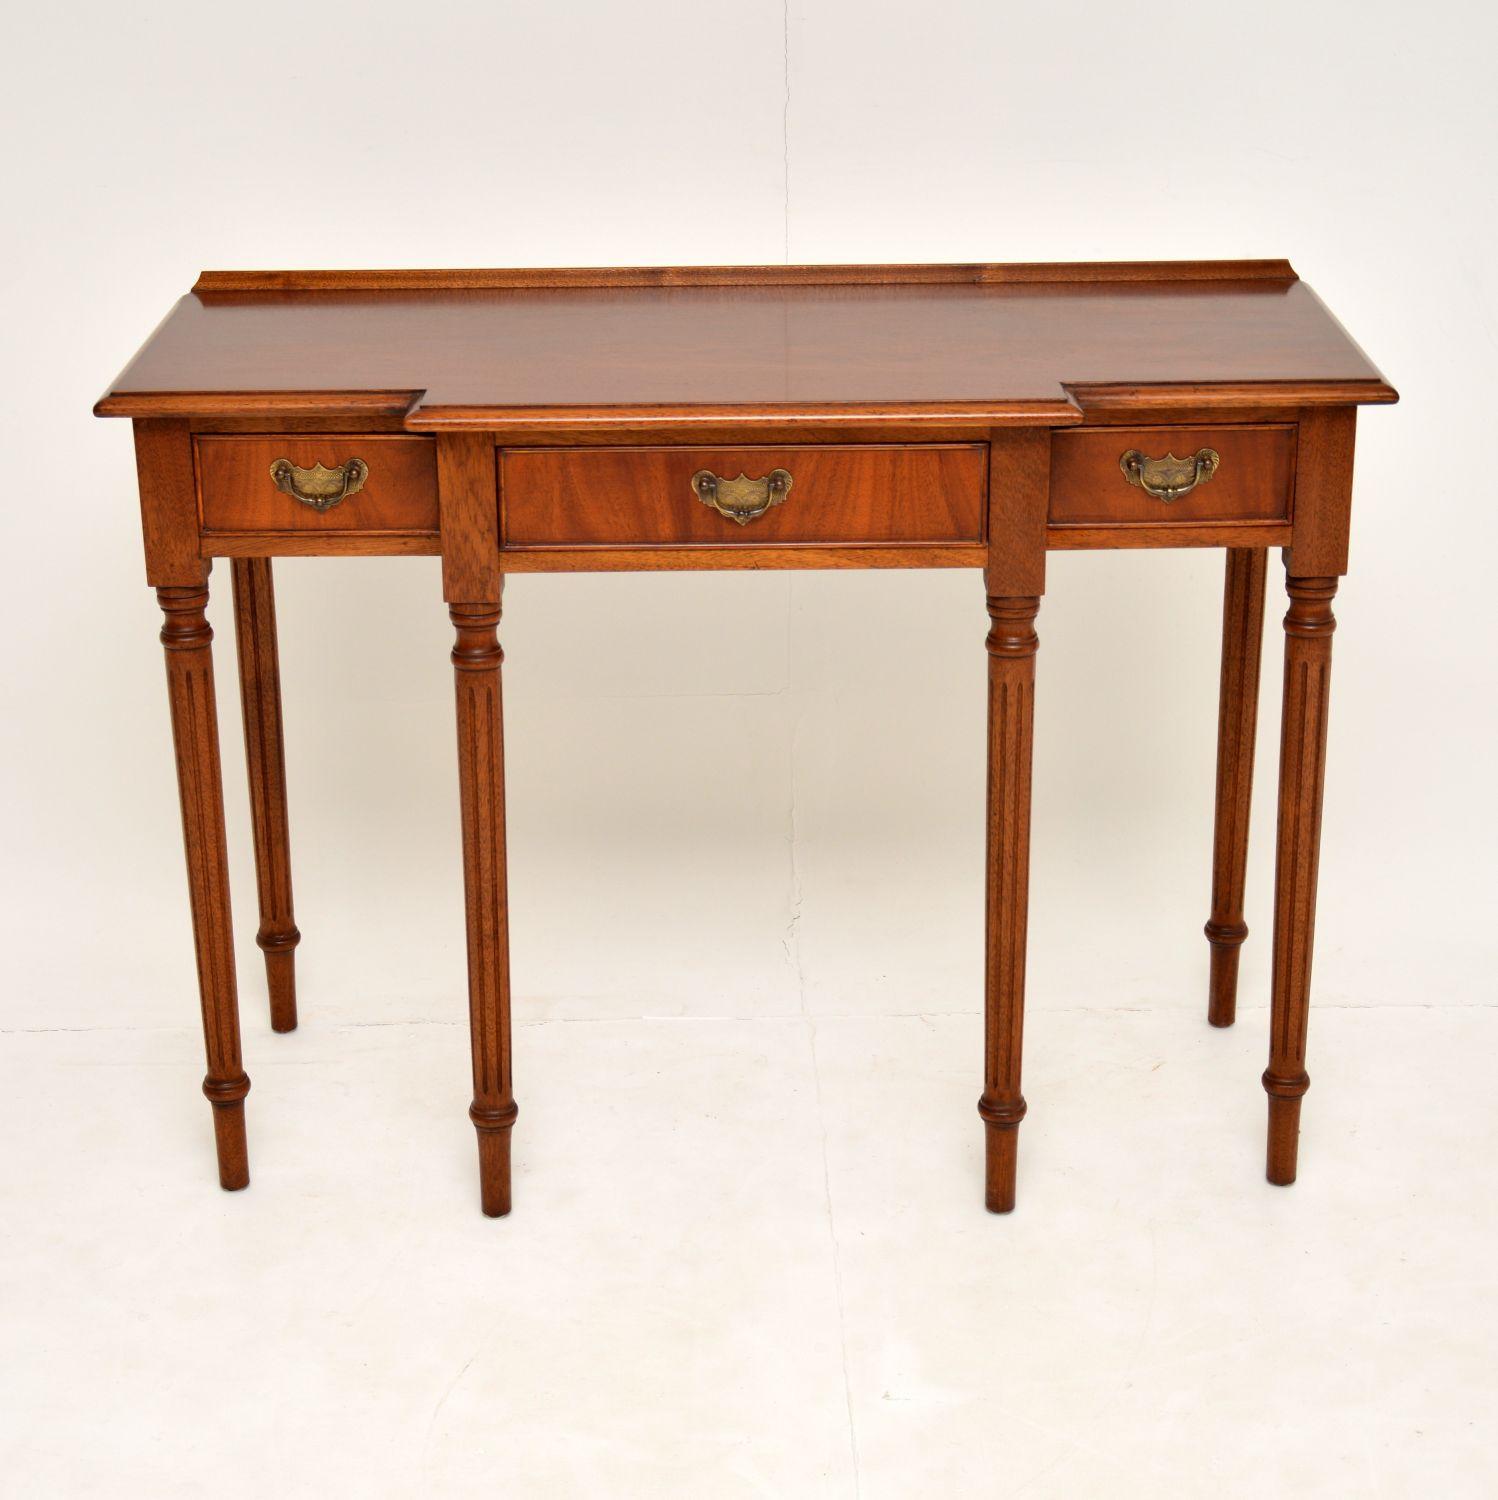 A smart and top quality mahogany console table in the antique Georgian style, which I would date from circa 1950s period.

This is really well made and is of very useful proportions, being not too deep. It has a lovely breakfront design, with